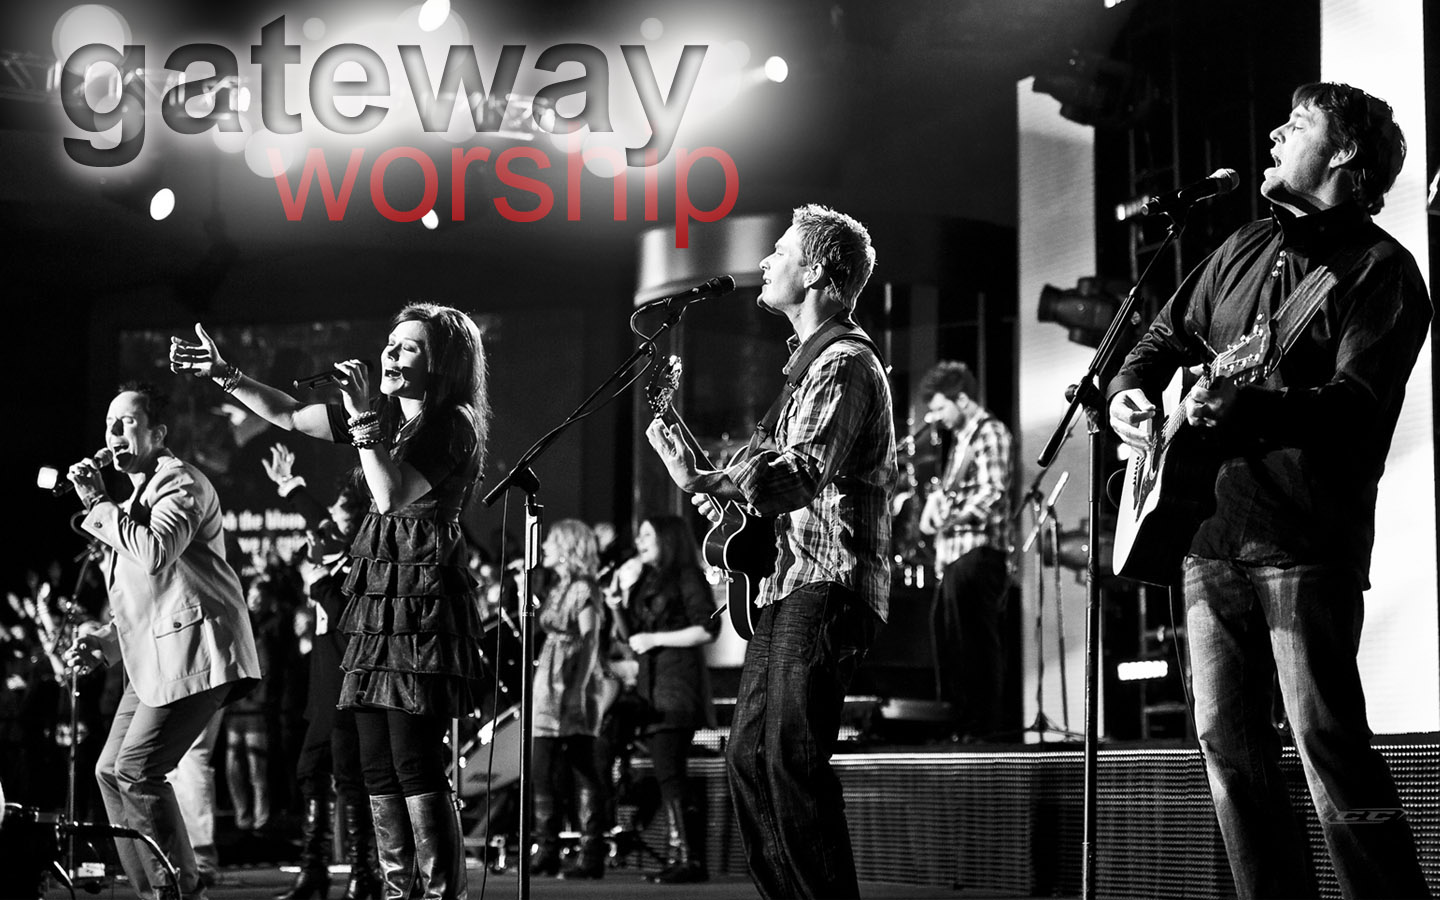 Gateway Worship - first 10 years 2013 Biography and history